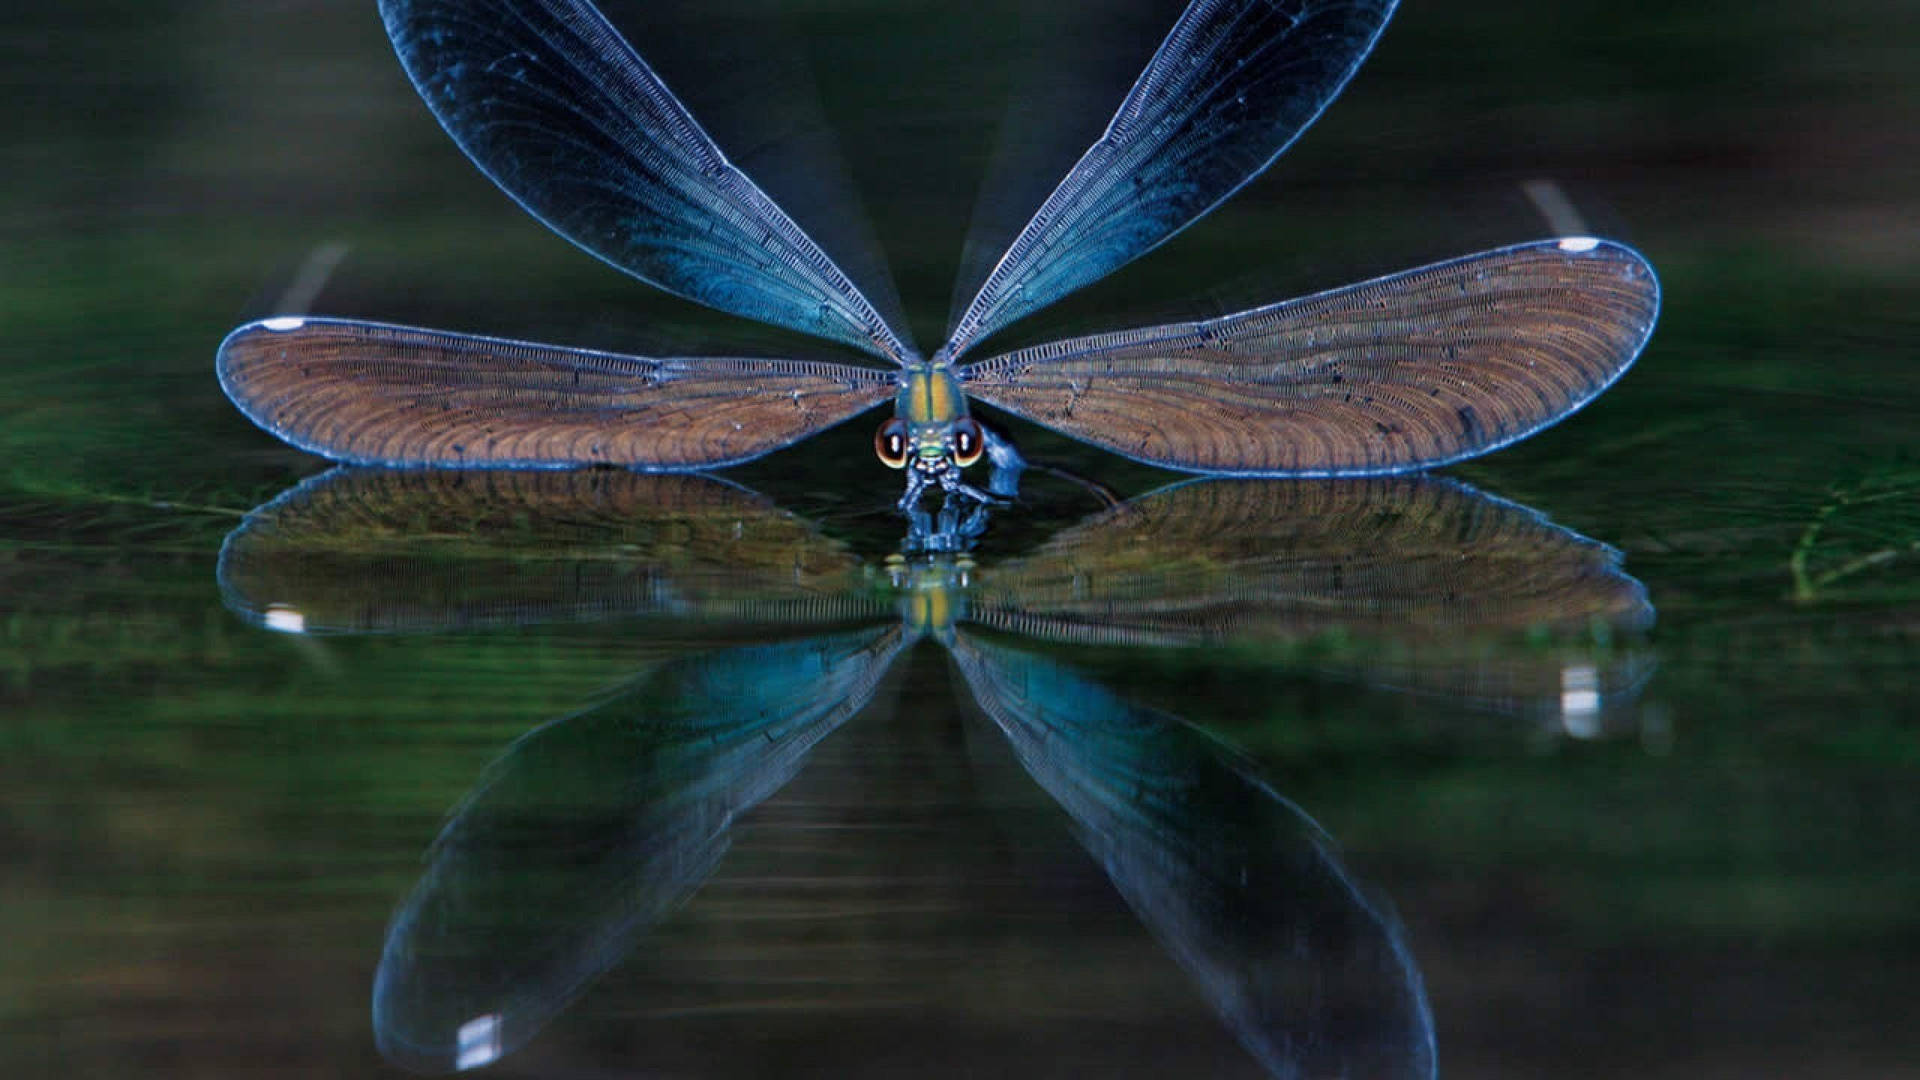 Free Dragonfly Wallpaper Downloads, [100+] Dragonfly Wallpapers for FREE |  